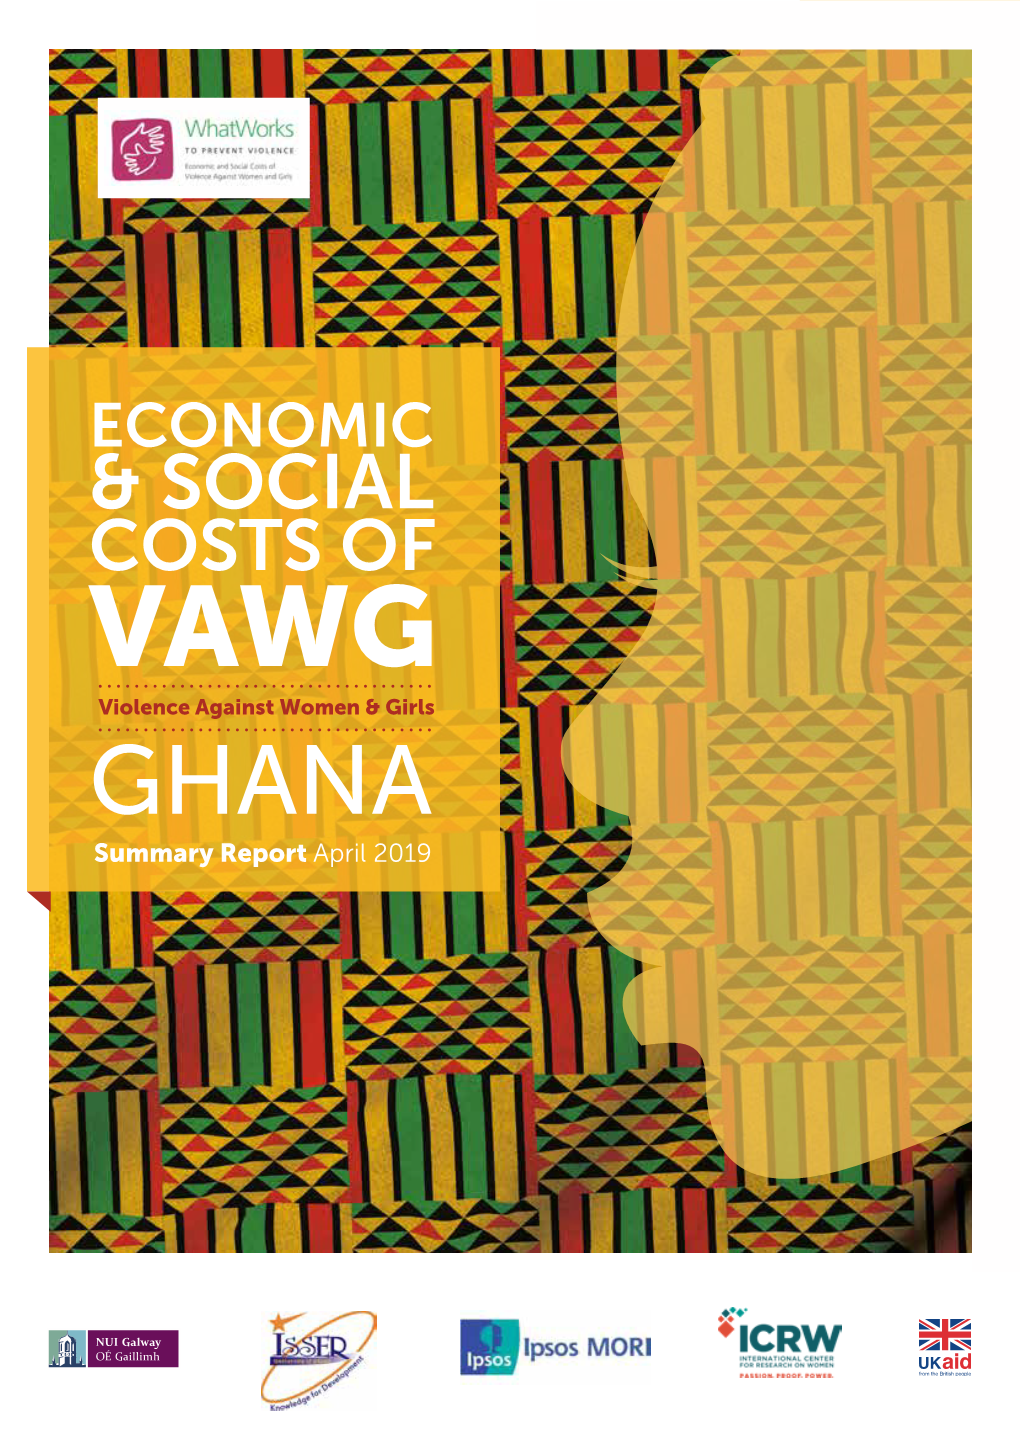 Economic and Social Costs of Violence Against Women in Ghana: Summary Report